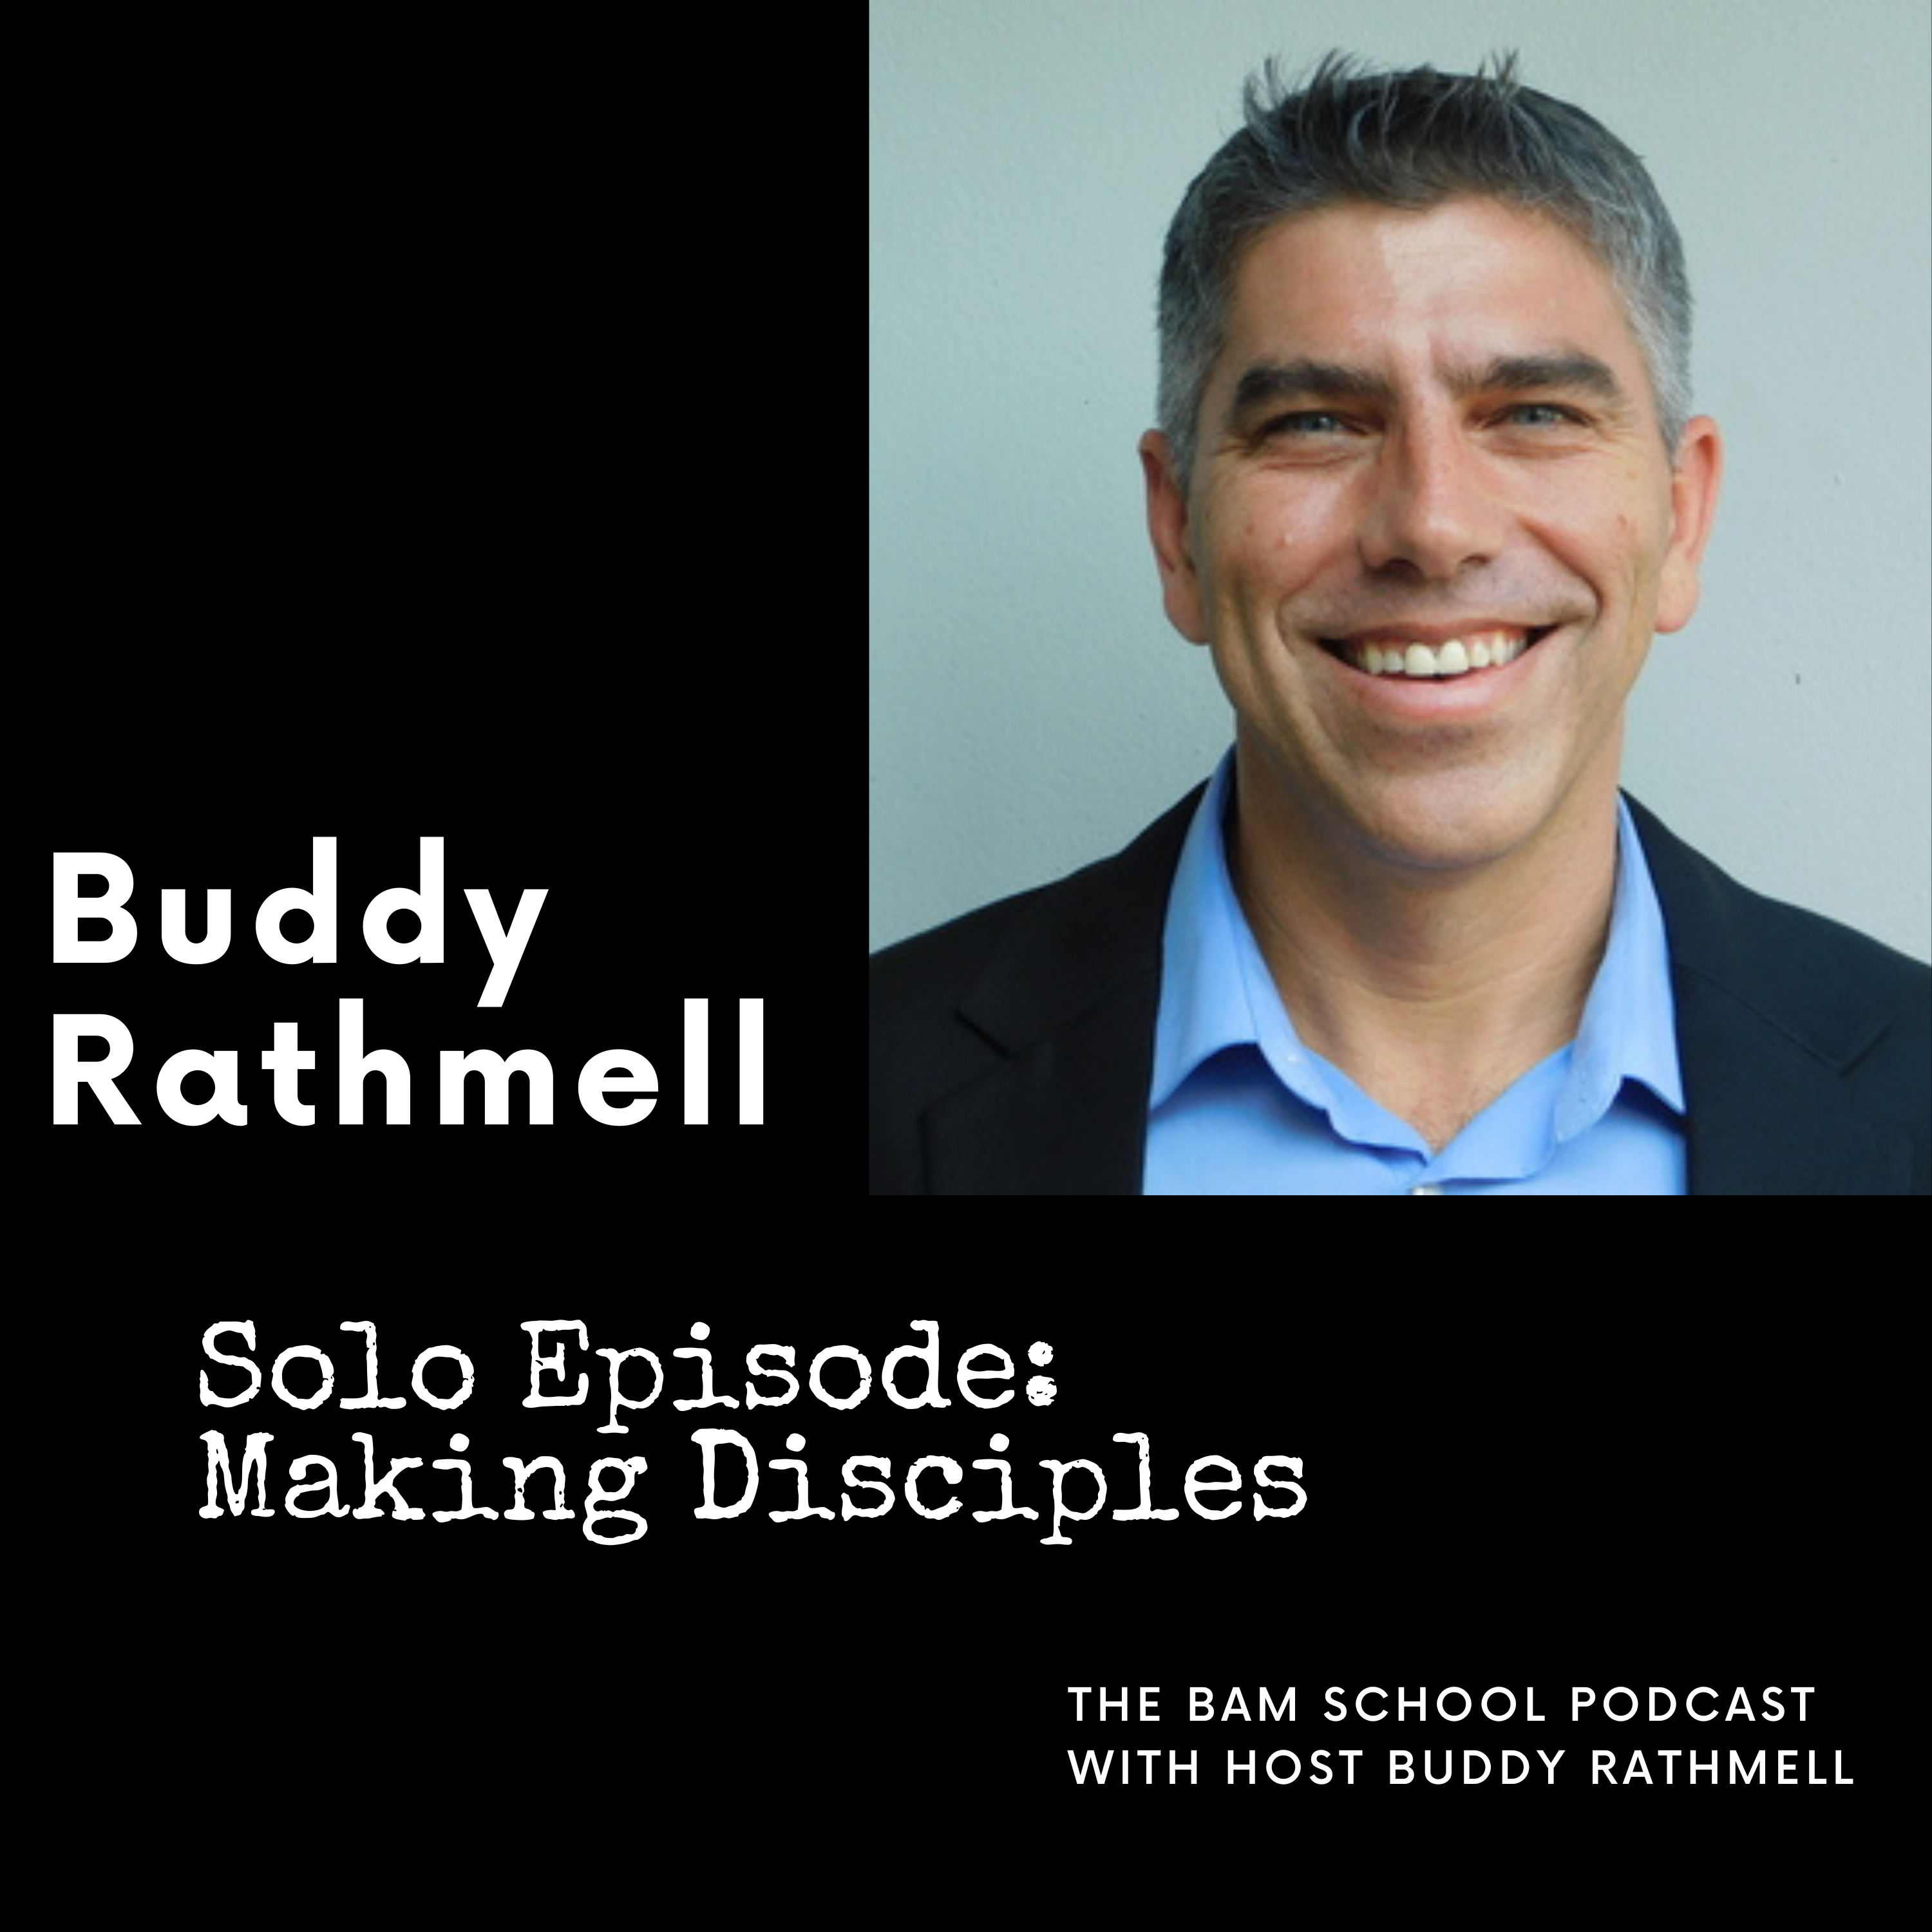 Making Disciples: Solo Episode